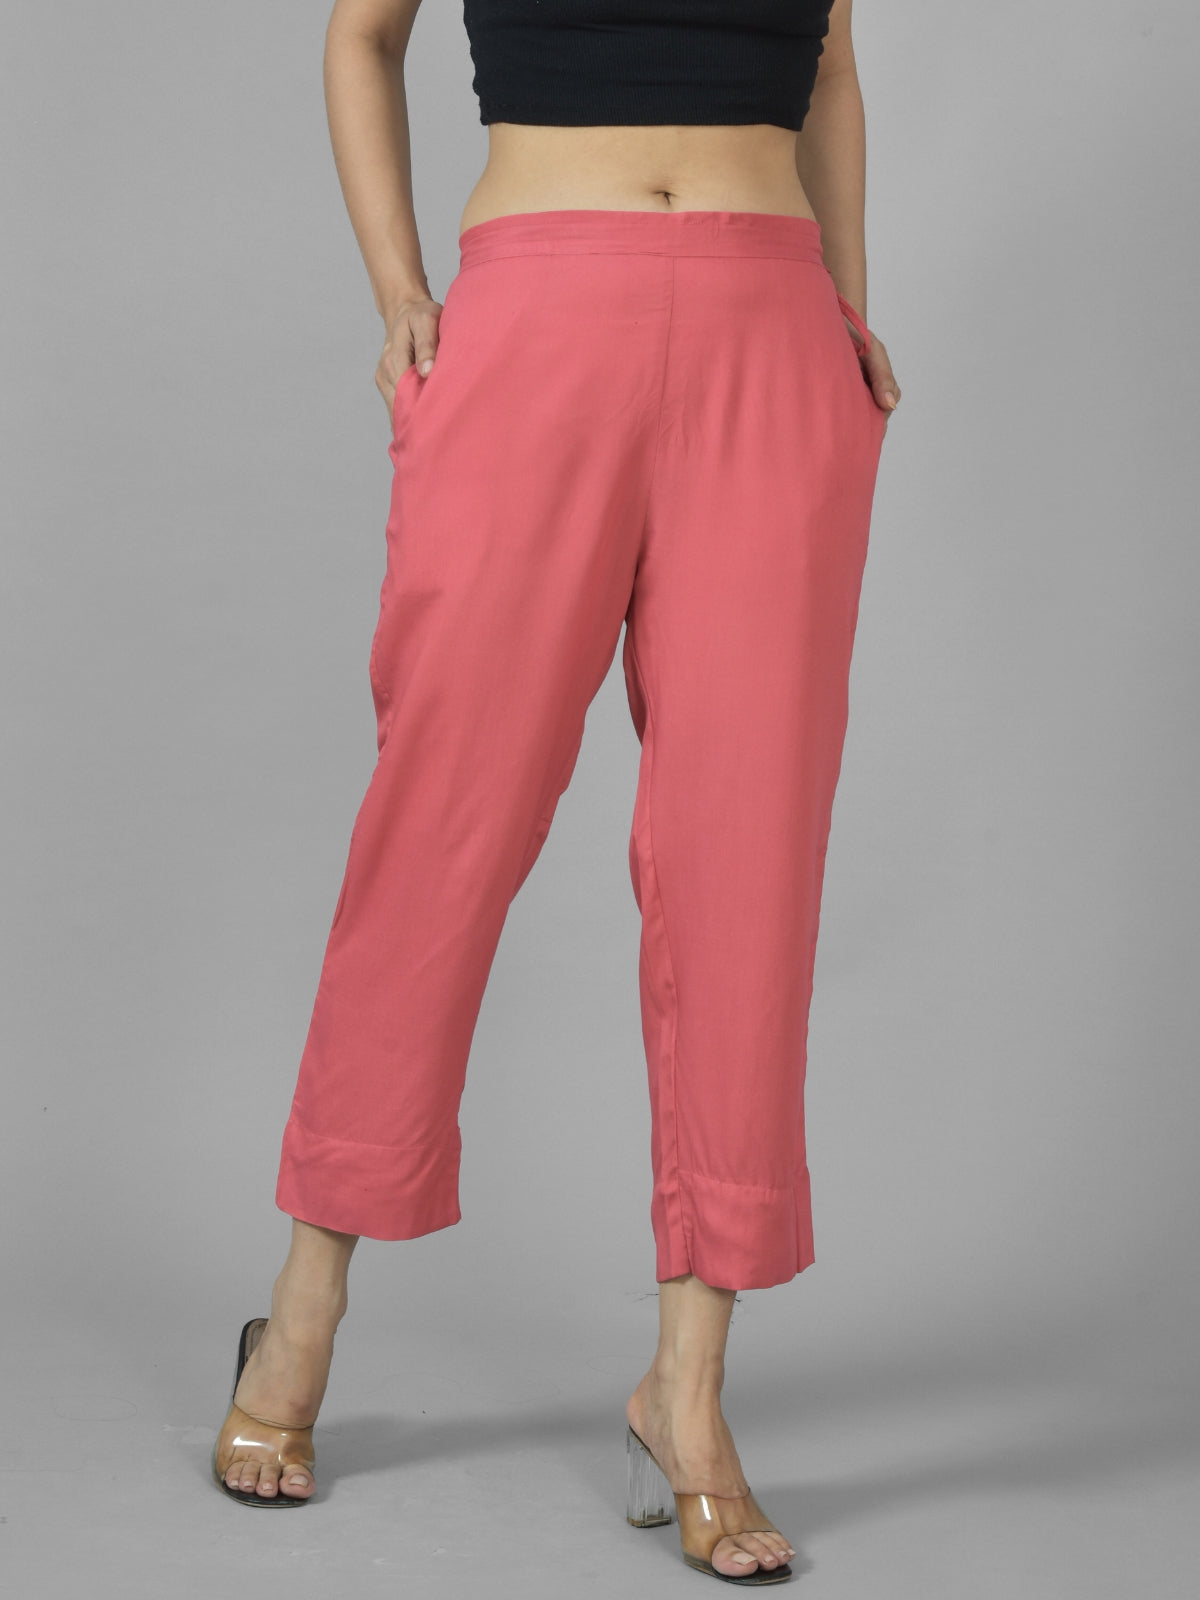 Women Solid Mauve Pink Rayon Culottes Trouser